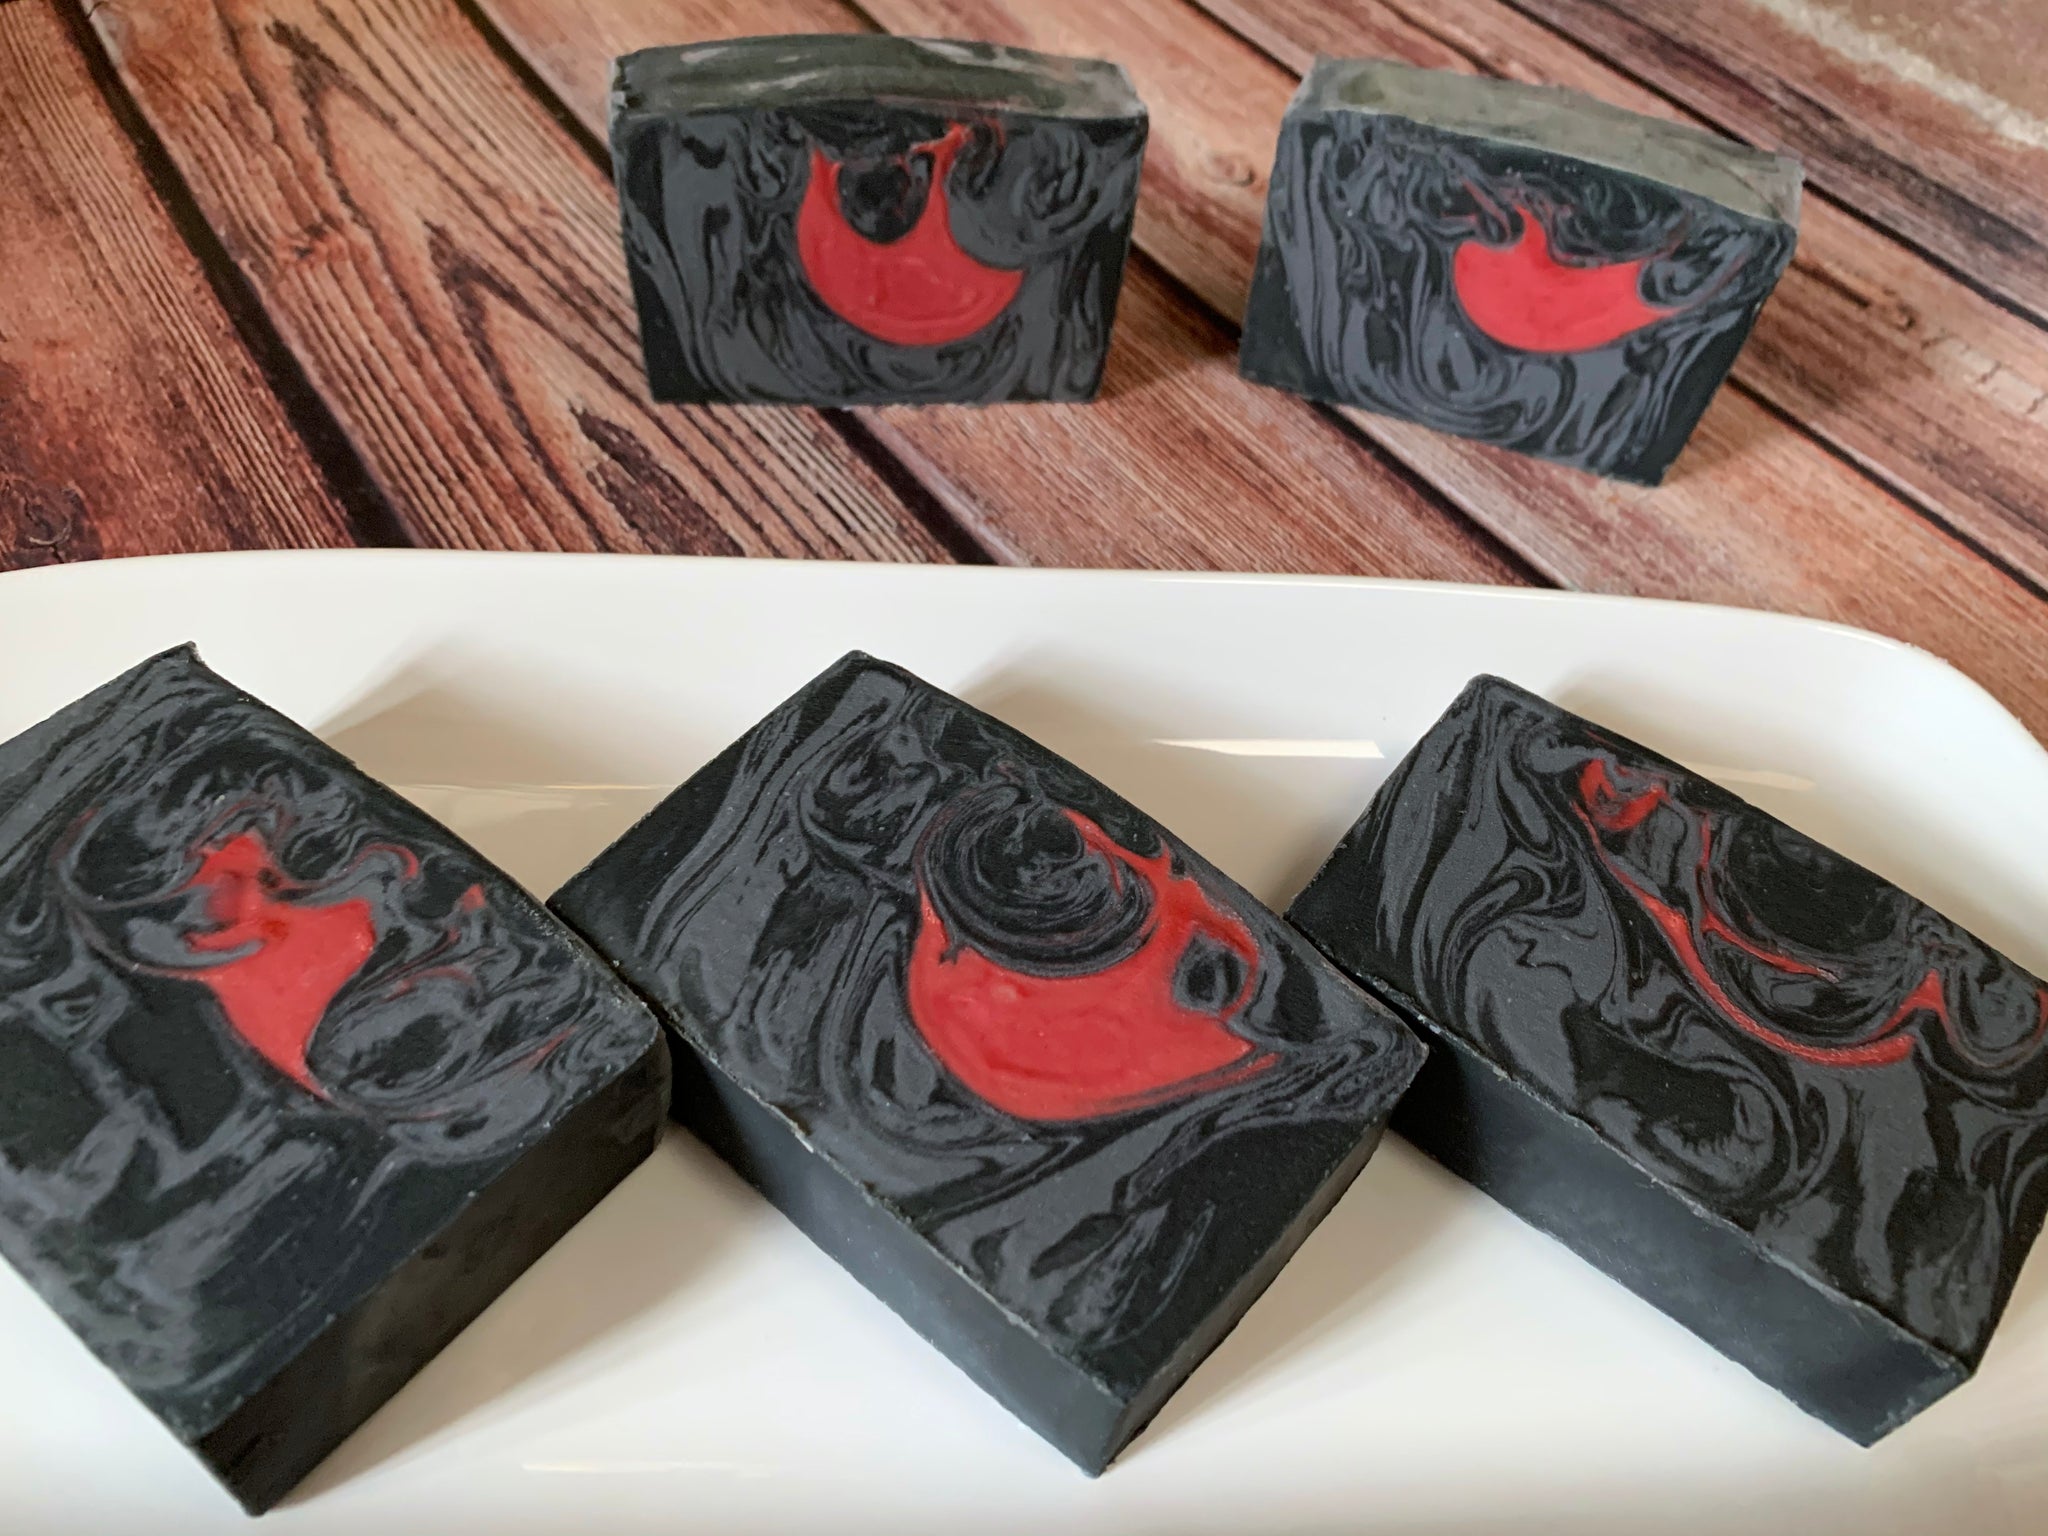 black and red craft beer soap handmade in texas with black wit-o witbier from no label brewing company Katy texas craft brewery beer soap for him with activated charcoal spunkndisorderly beer soap